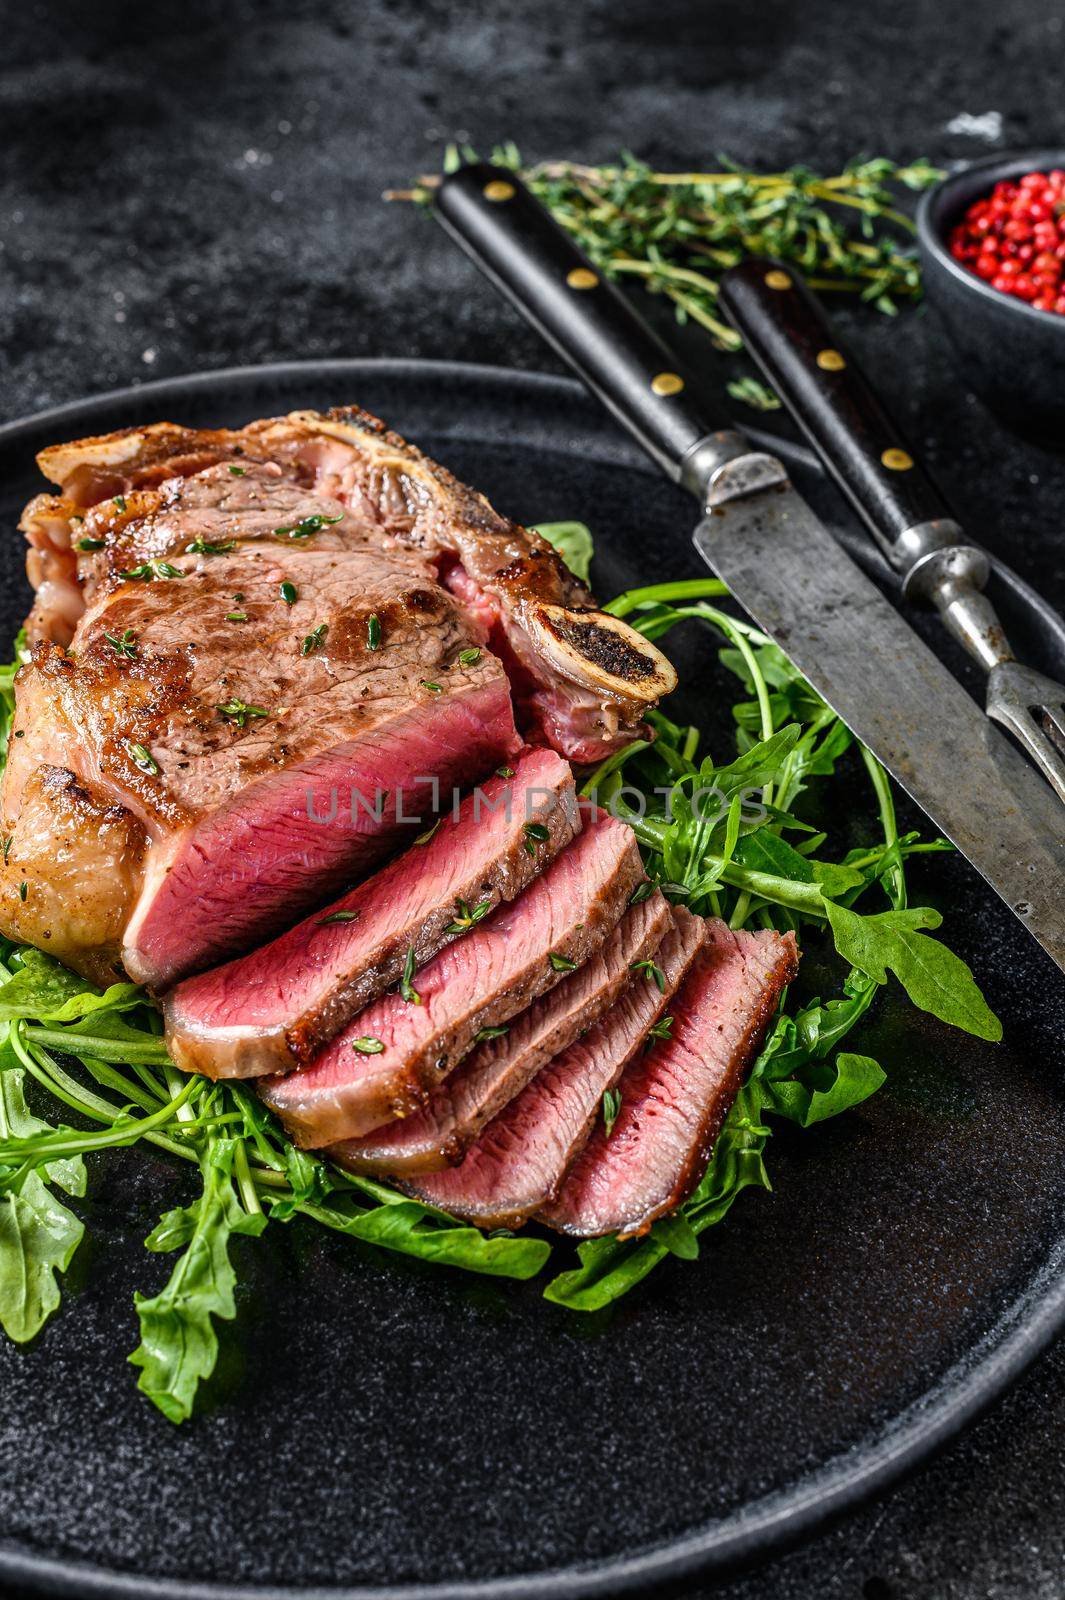 Rare sliced grilled club beef meat steak. Black background. Top view.